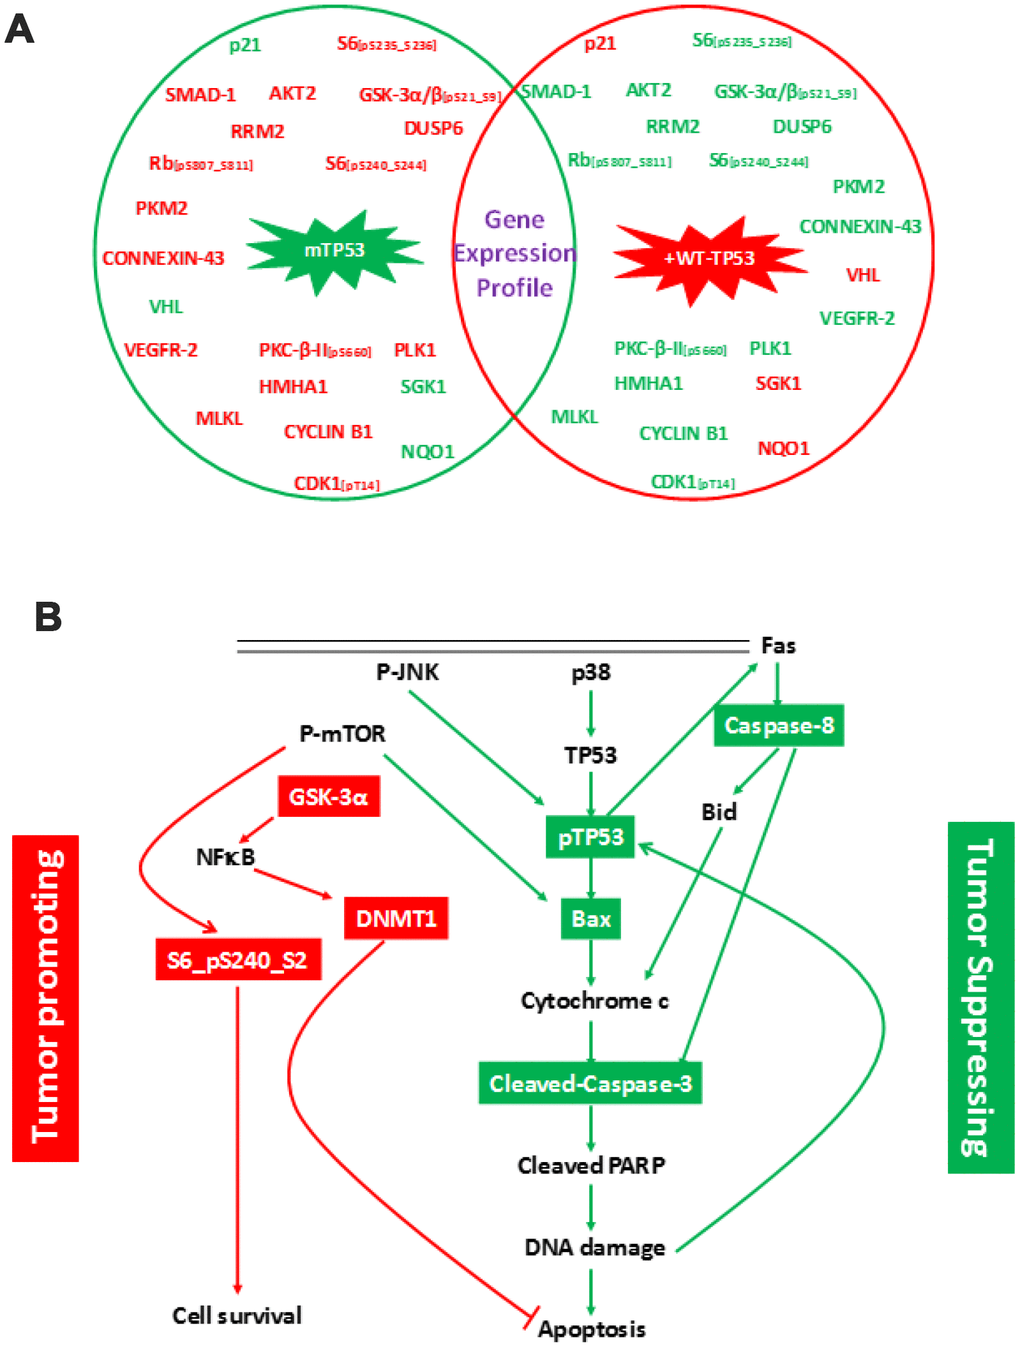 Changes in protein expression profile in MIA-PaCa-2 cells expressing pLXSN compared to WT-TP53. (A) Protein expression was assayed by RPPA. Proteins indicated in red and green denotes increased and decreased expression, respectively. Genes in red and green indicate tumor promoting and suppressor activities, respectively. (B) Schematic demonstrating cell signaling in MIA-PaCa-2+pLXSN cells promoting cell survival (in red) while significantly inhibiting apoptosis (in green).